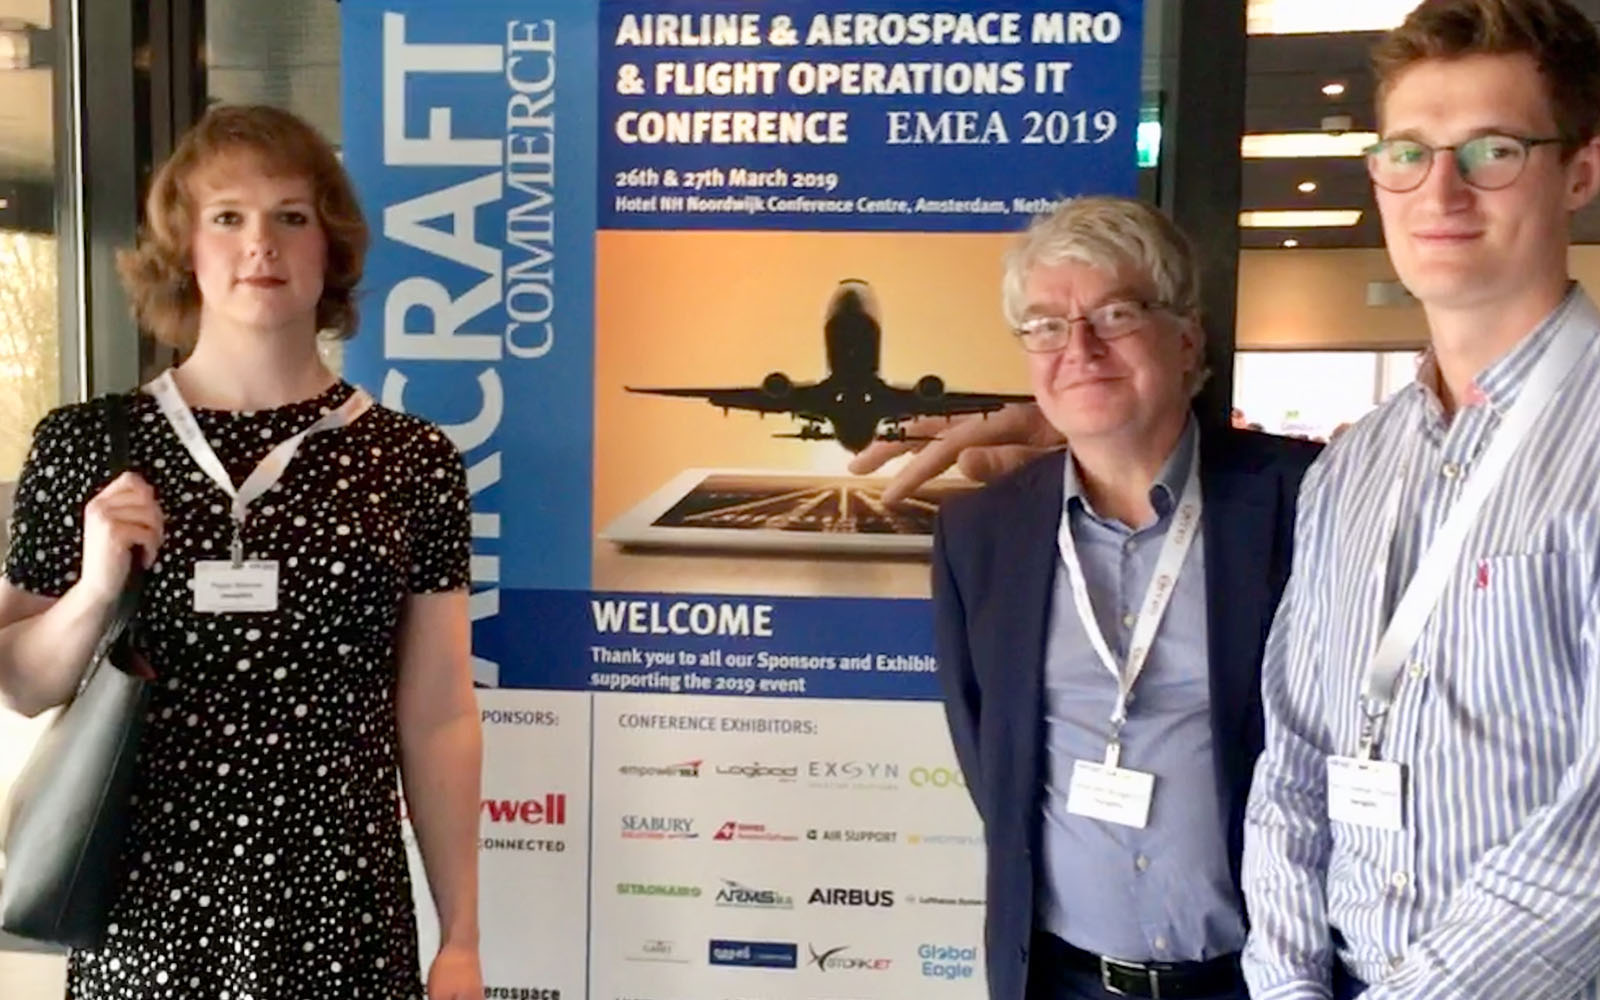 Aerogility attends Airline & Aerospace MRO & Flight Operations IT Conference for second time